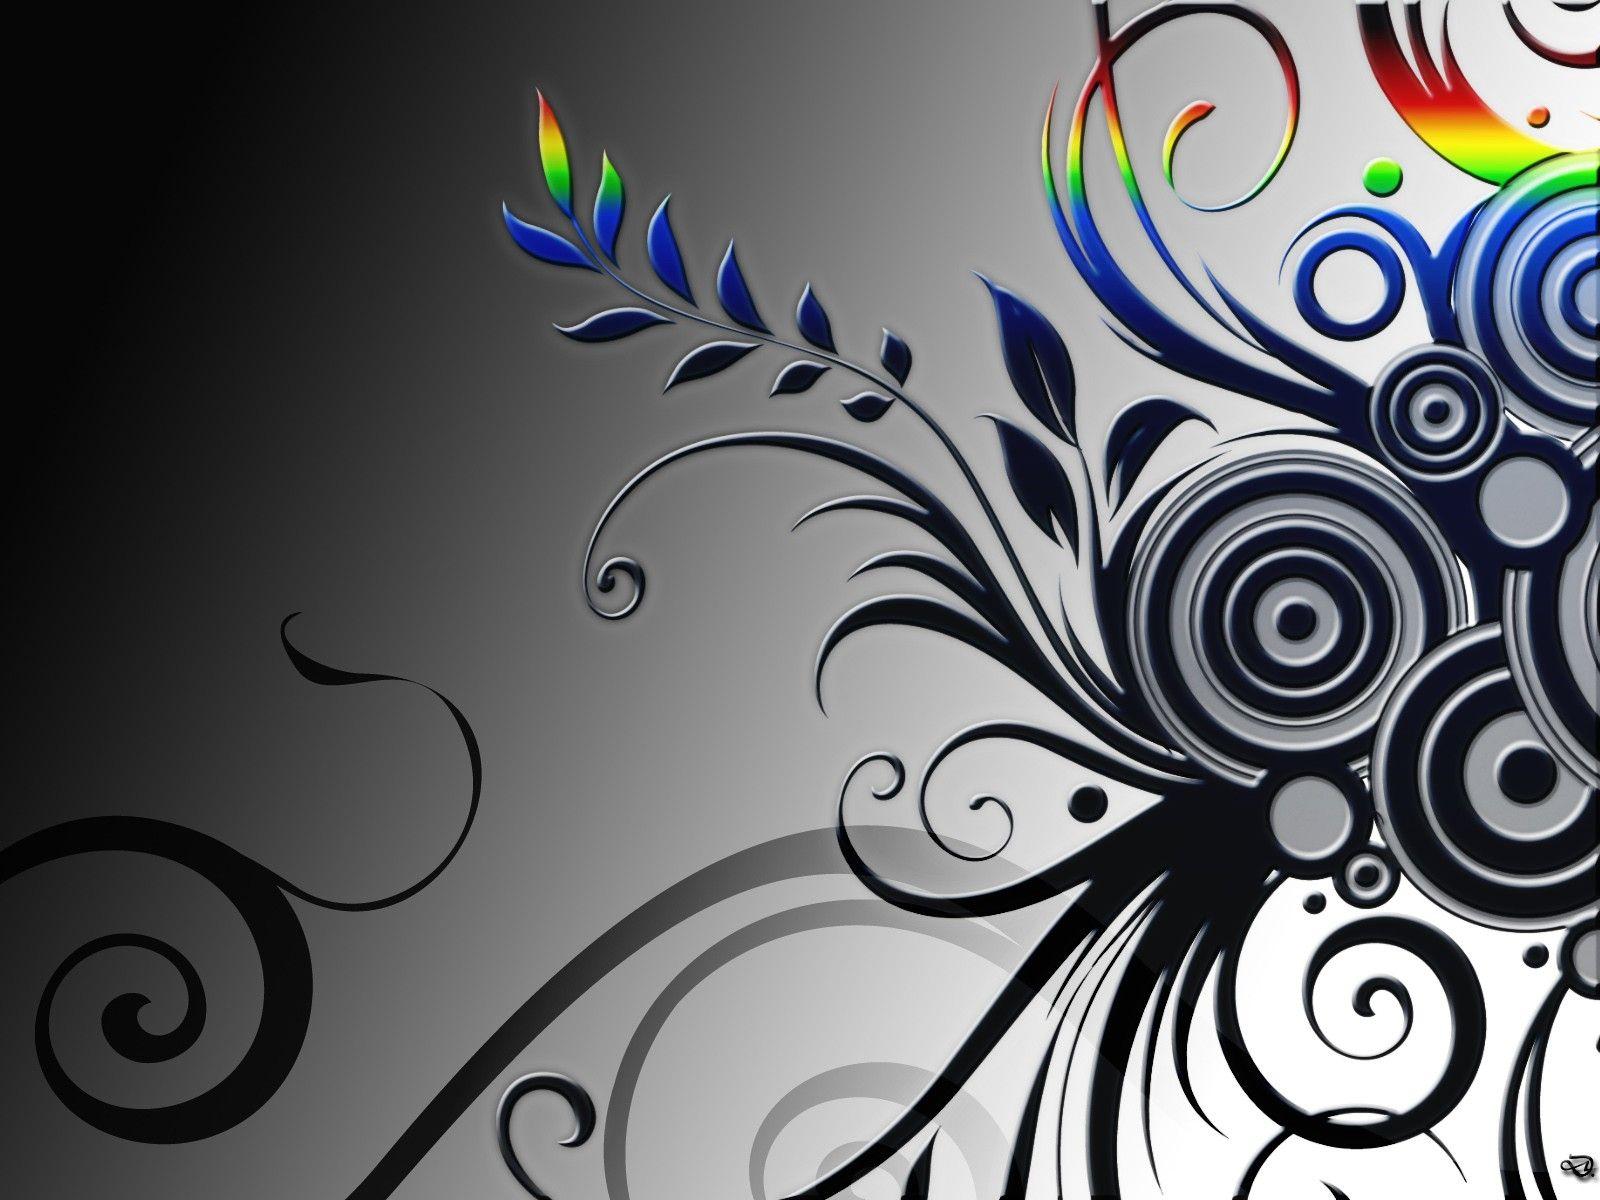 Download Black And White Vector Art Image Wallpaper. Full HD